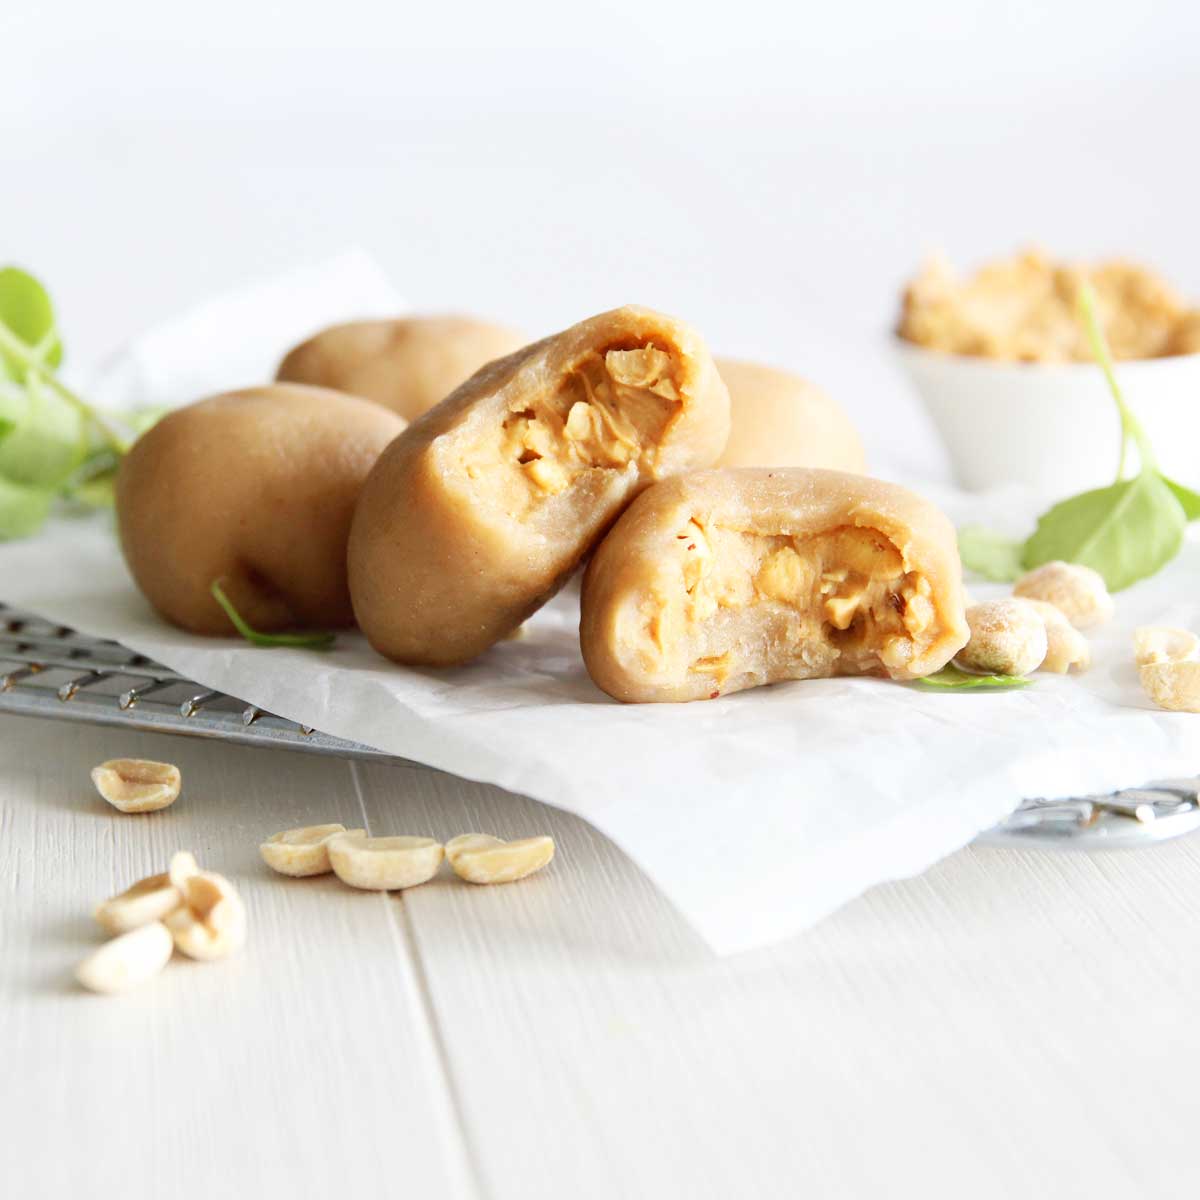 Chinese-Styled Peanut Butter Mochi Made in the Microwave - Peanut Butter Glaze